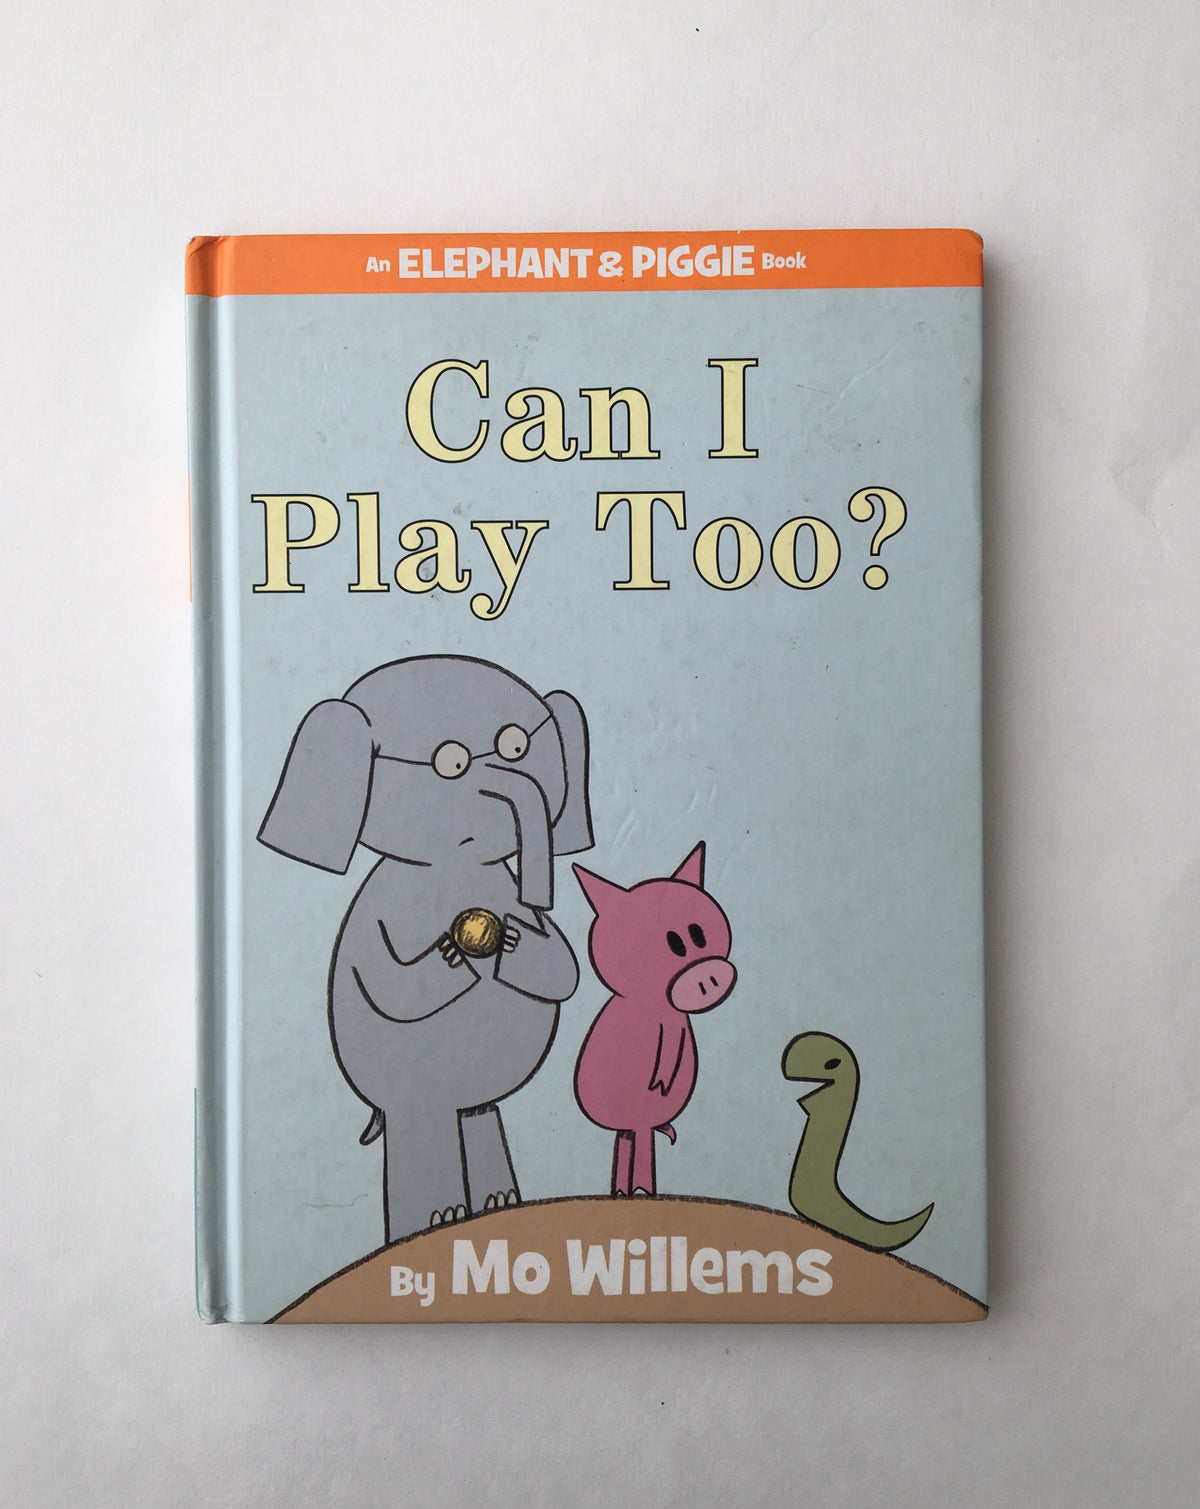 Can I Play Too? by Mo Willems